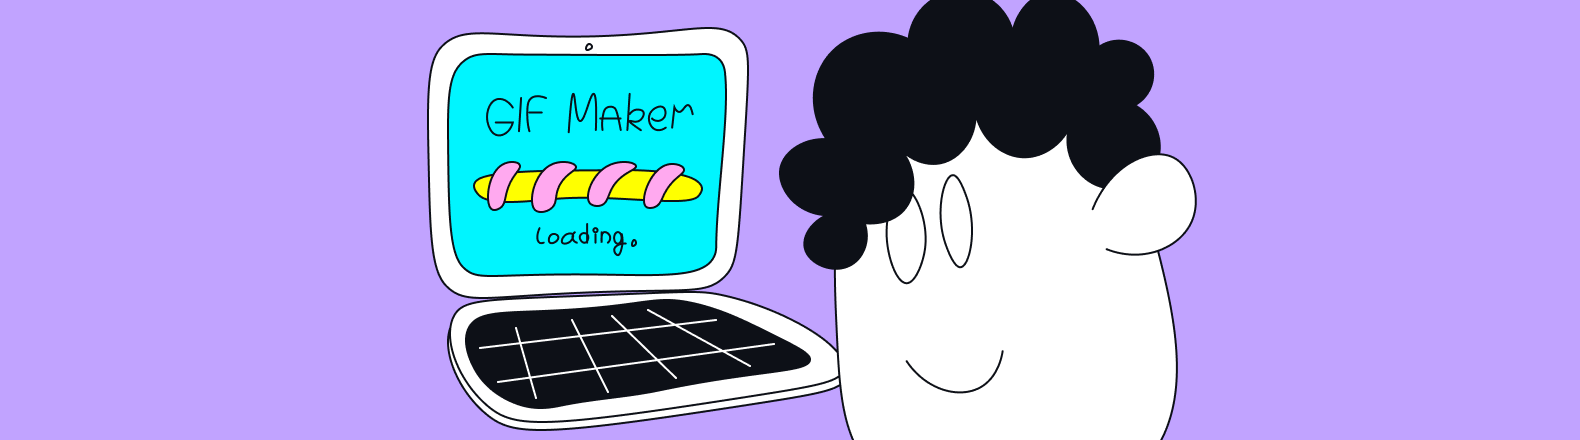 15 best online GIF makers for marketers